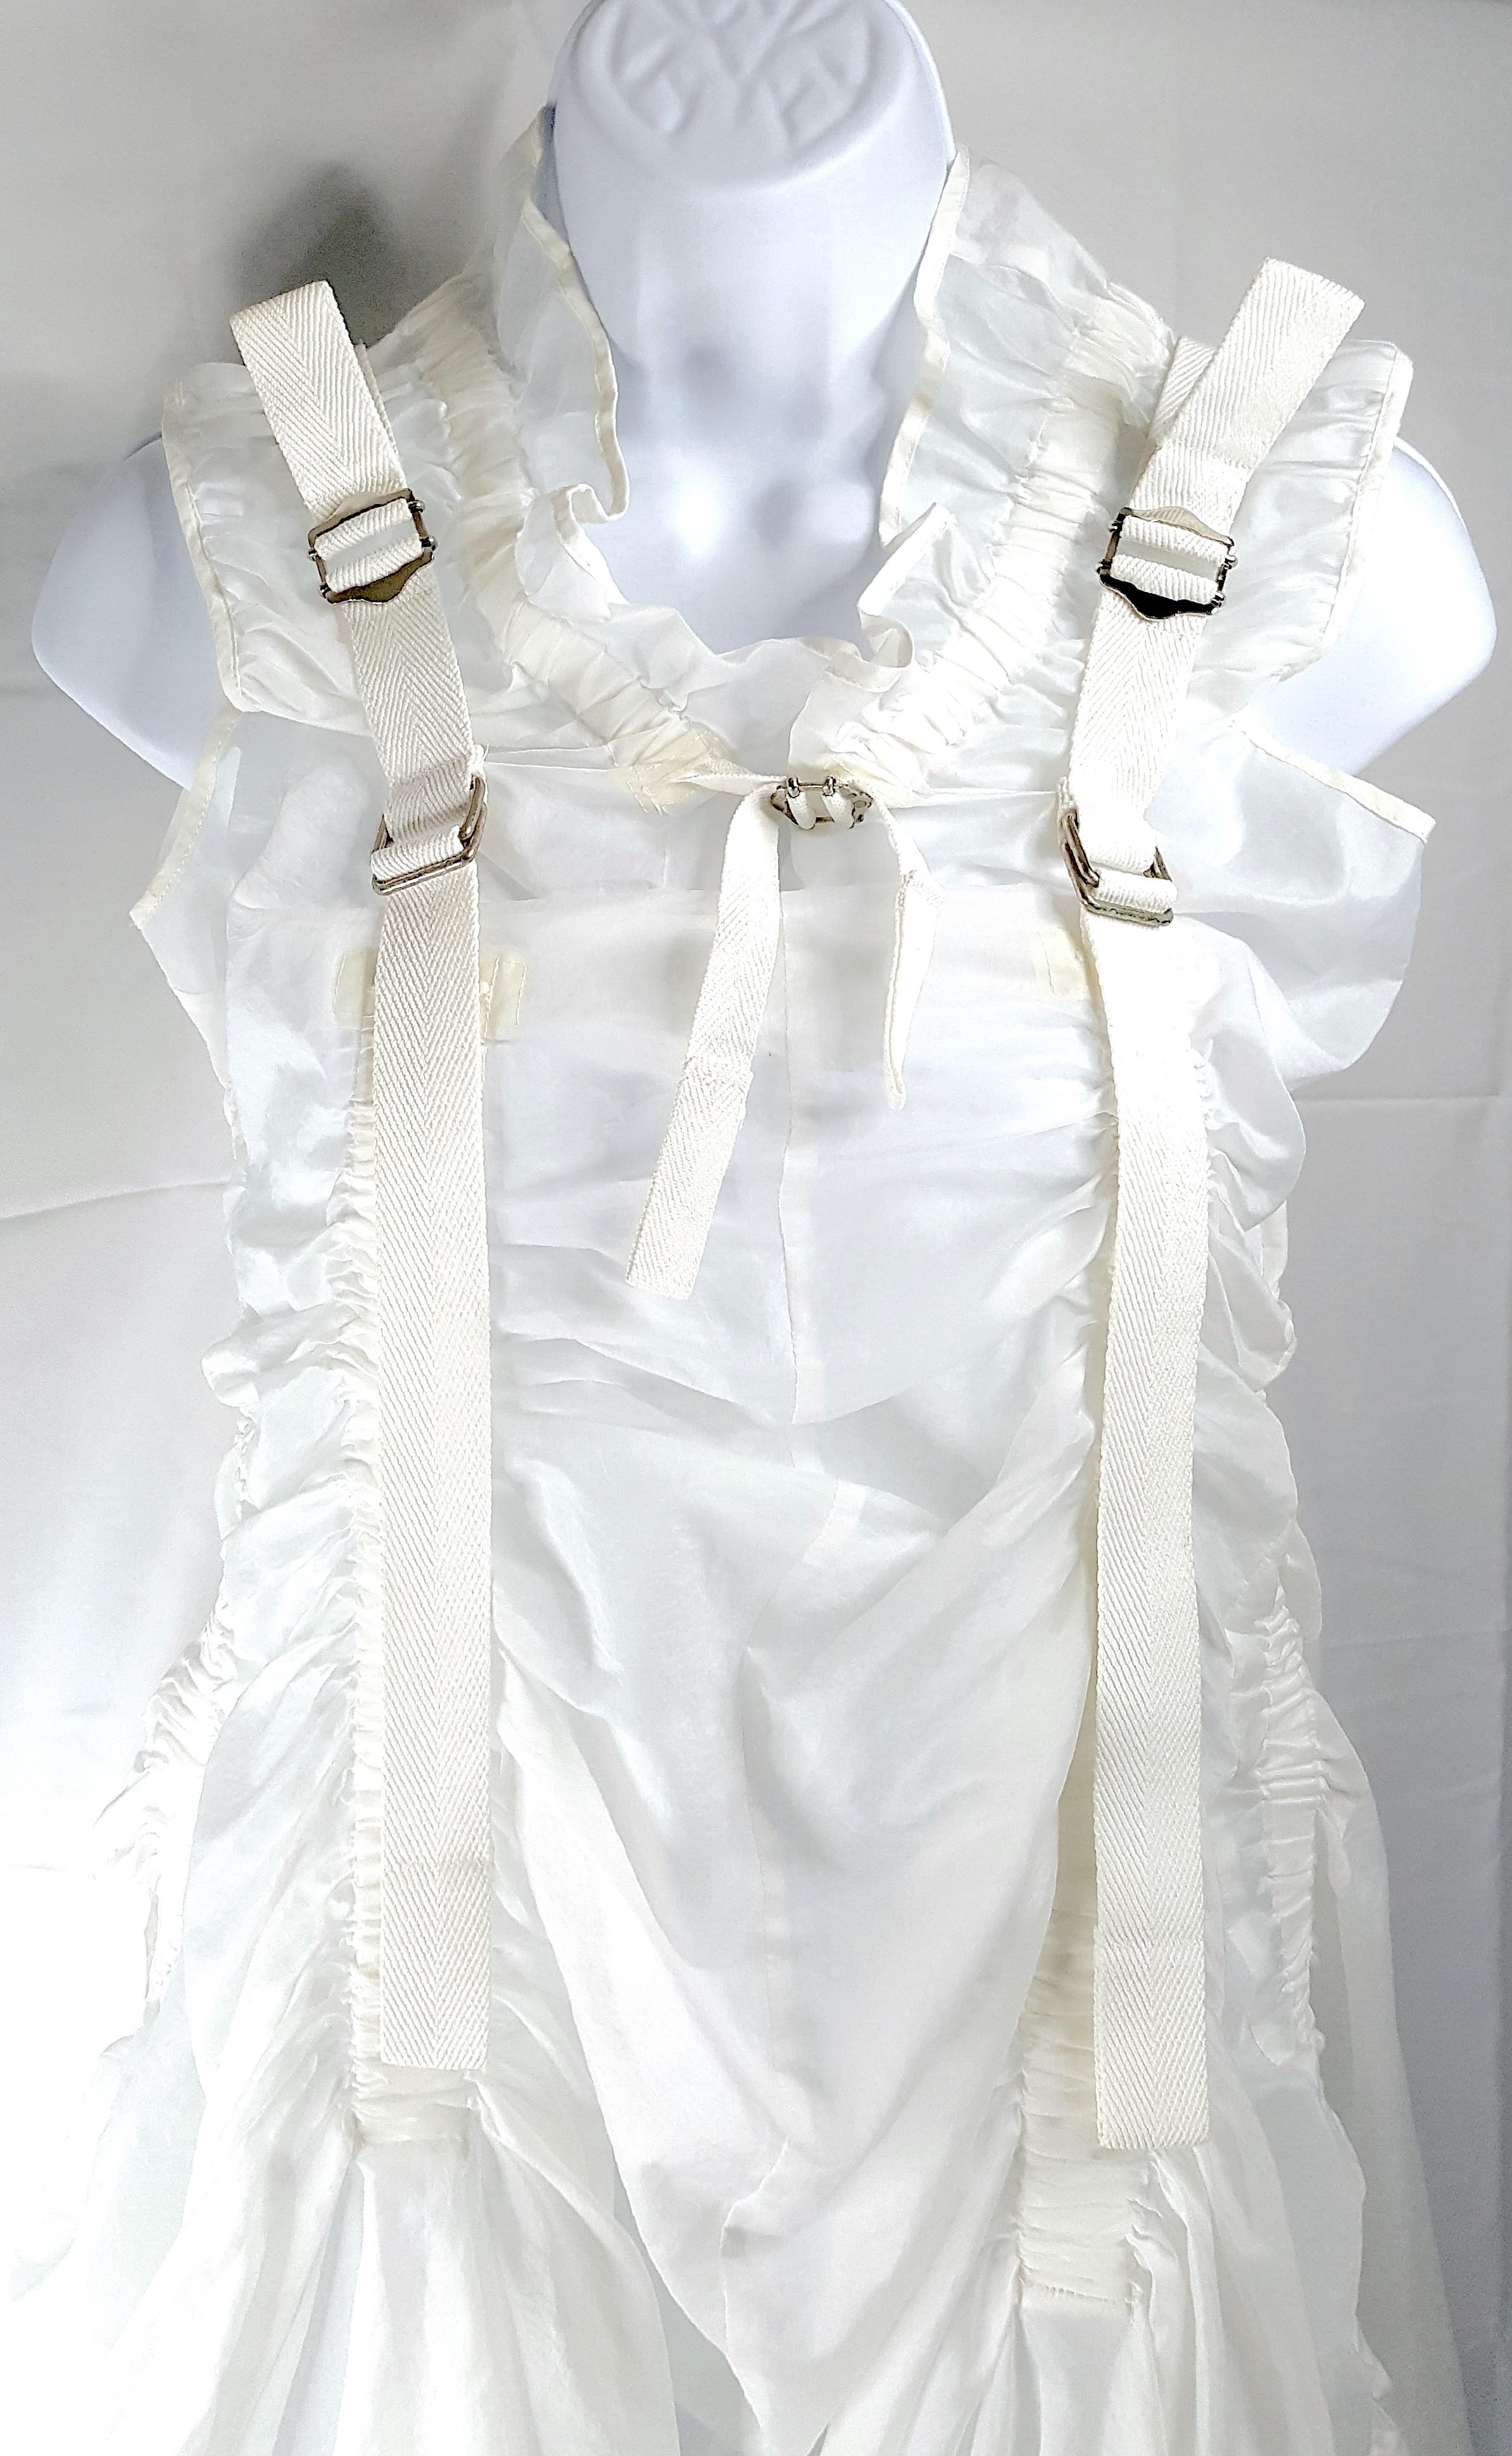 JunyaWantanabe 2003 RunwayLook1 Ruched Parachute Convertible White Dress Gown In Excellent Condition For Sale In Chicago, IL